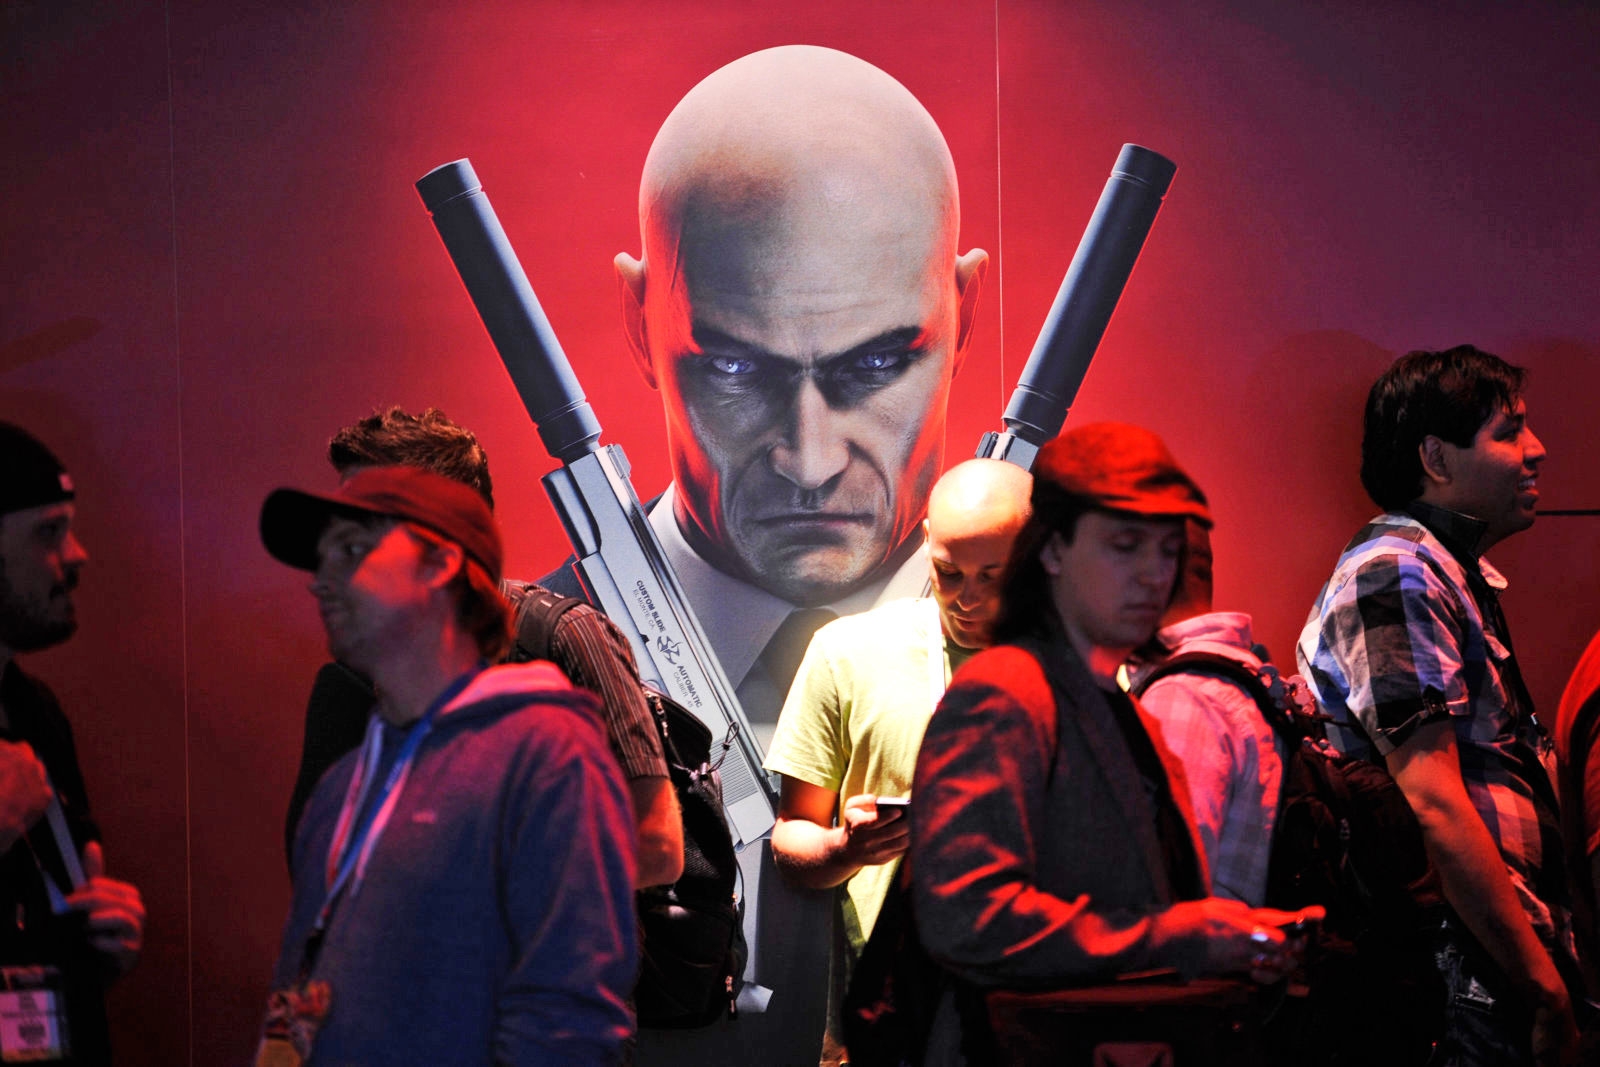 A 'Hitman' series is coming to Hulu from the creator of 'John Wick' | DeviceDaily.com